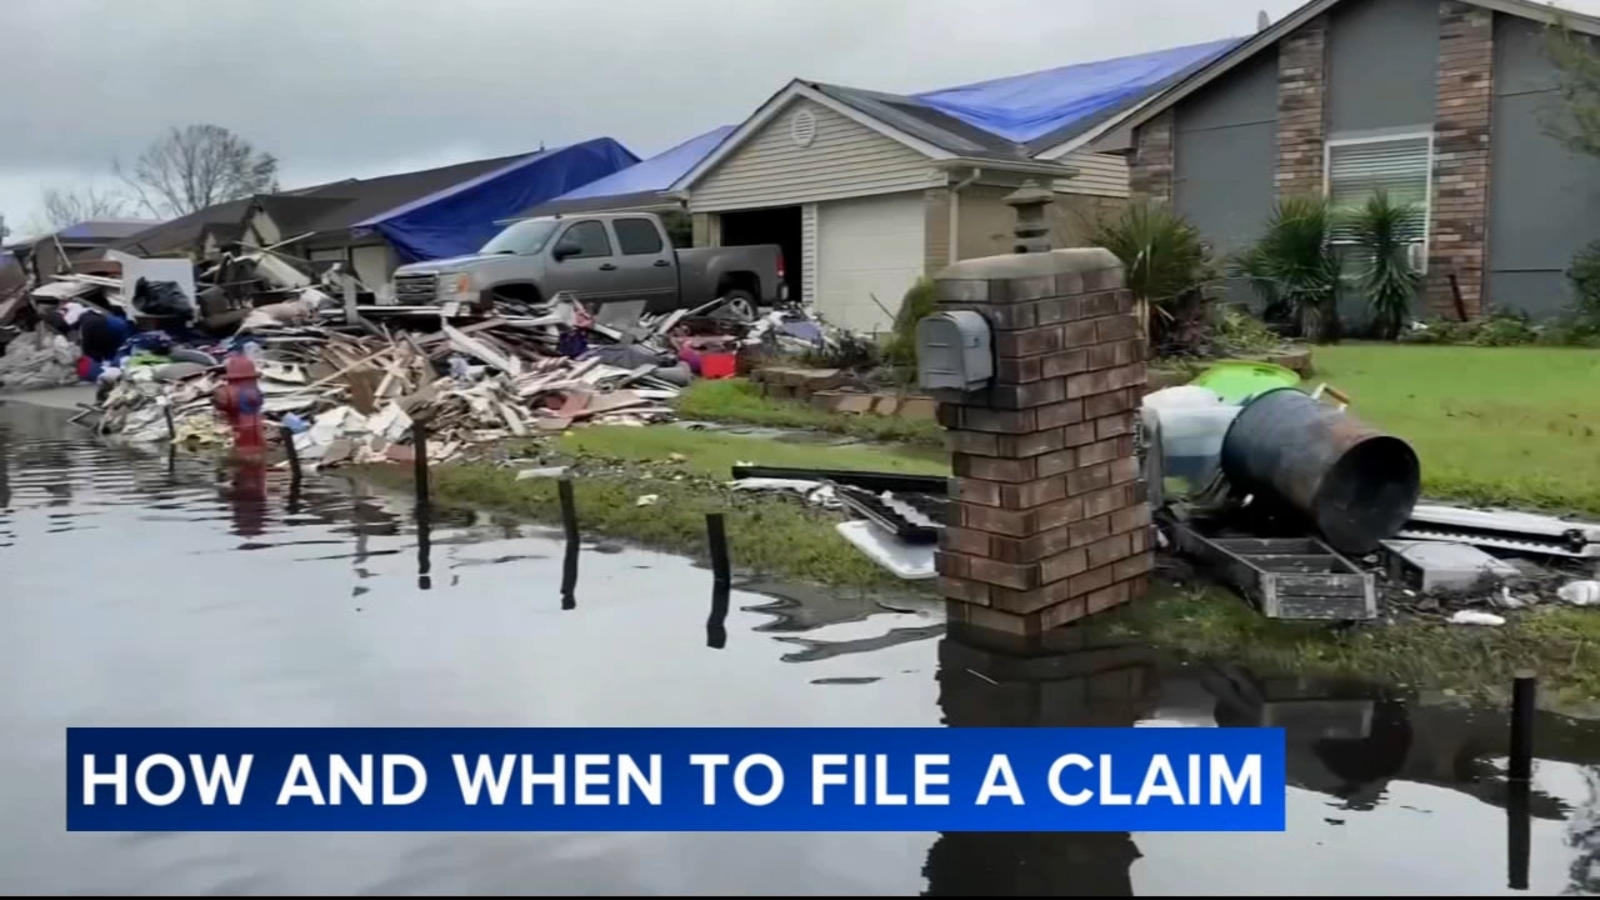 Consumer Reports explains how and when to file a homeowner’s insurance claim when Mother Nature strikes [Video]